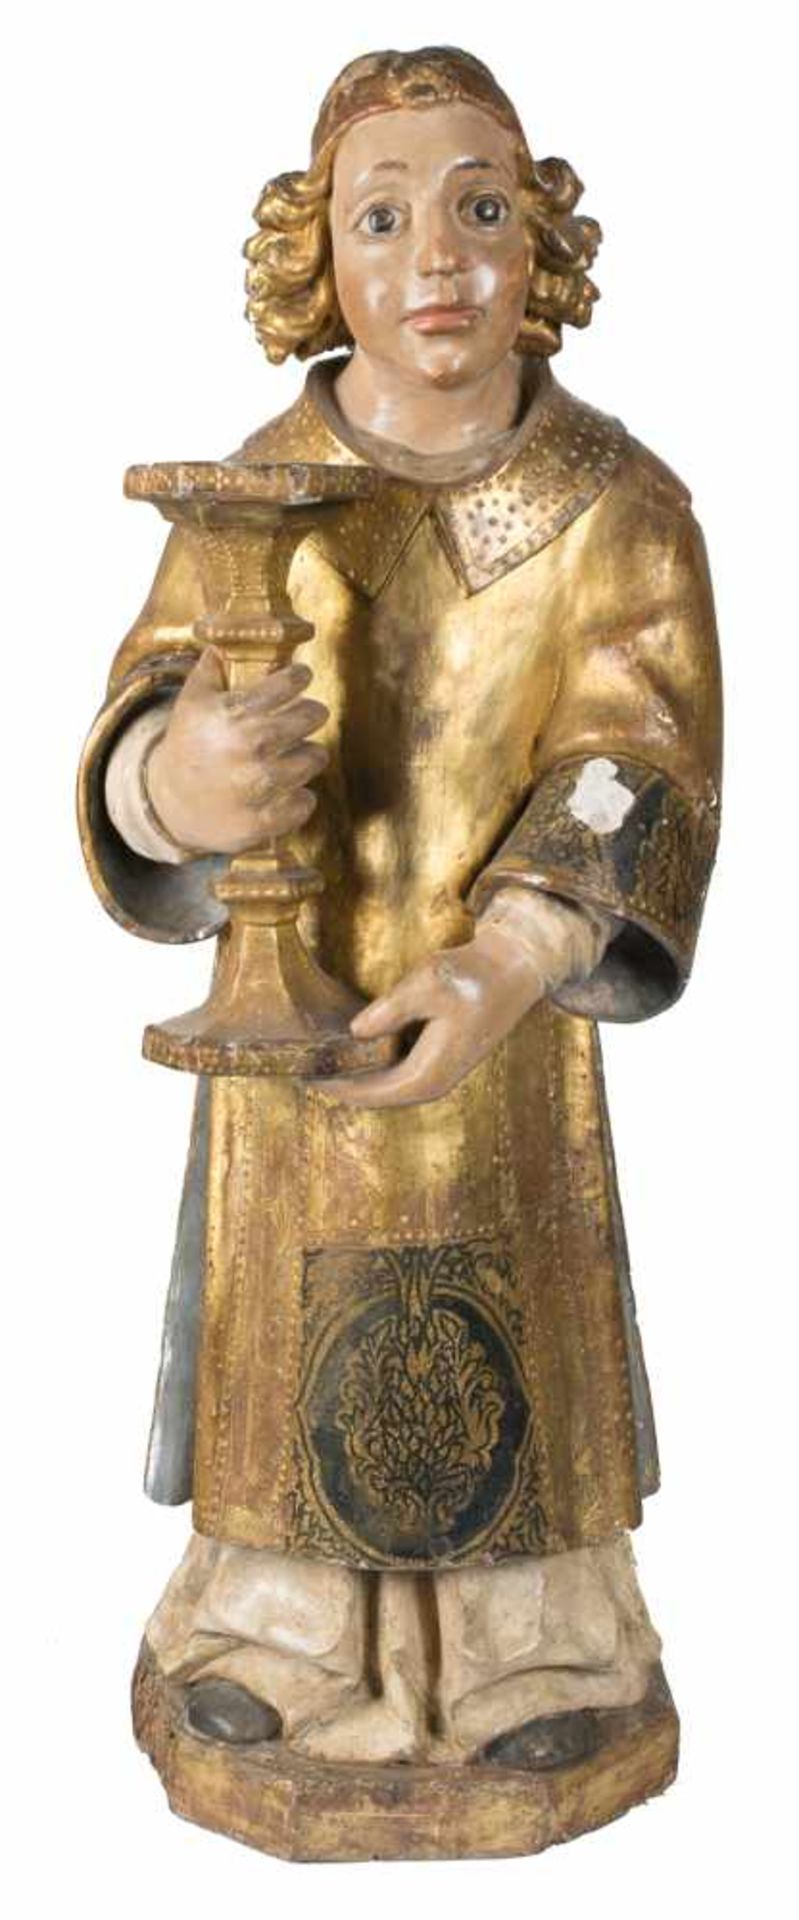 "Candle-bearing angel" Carved, gilded and polychromed wooden sculpture. Rioja or Navarra School.